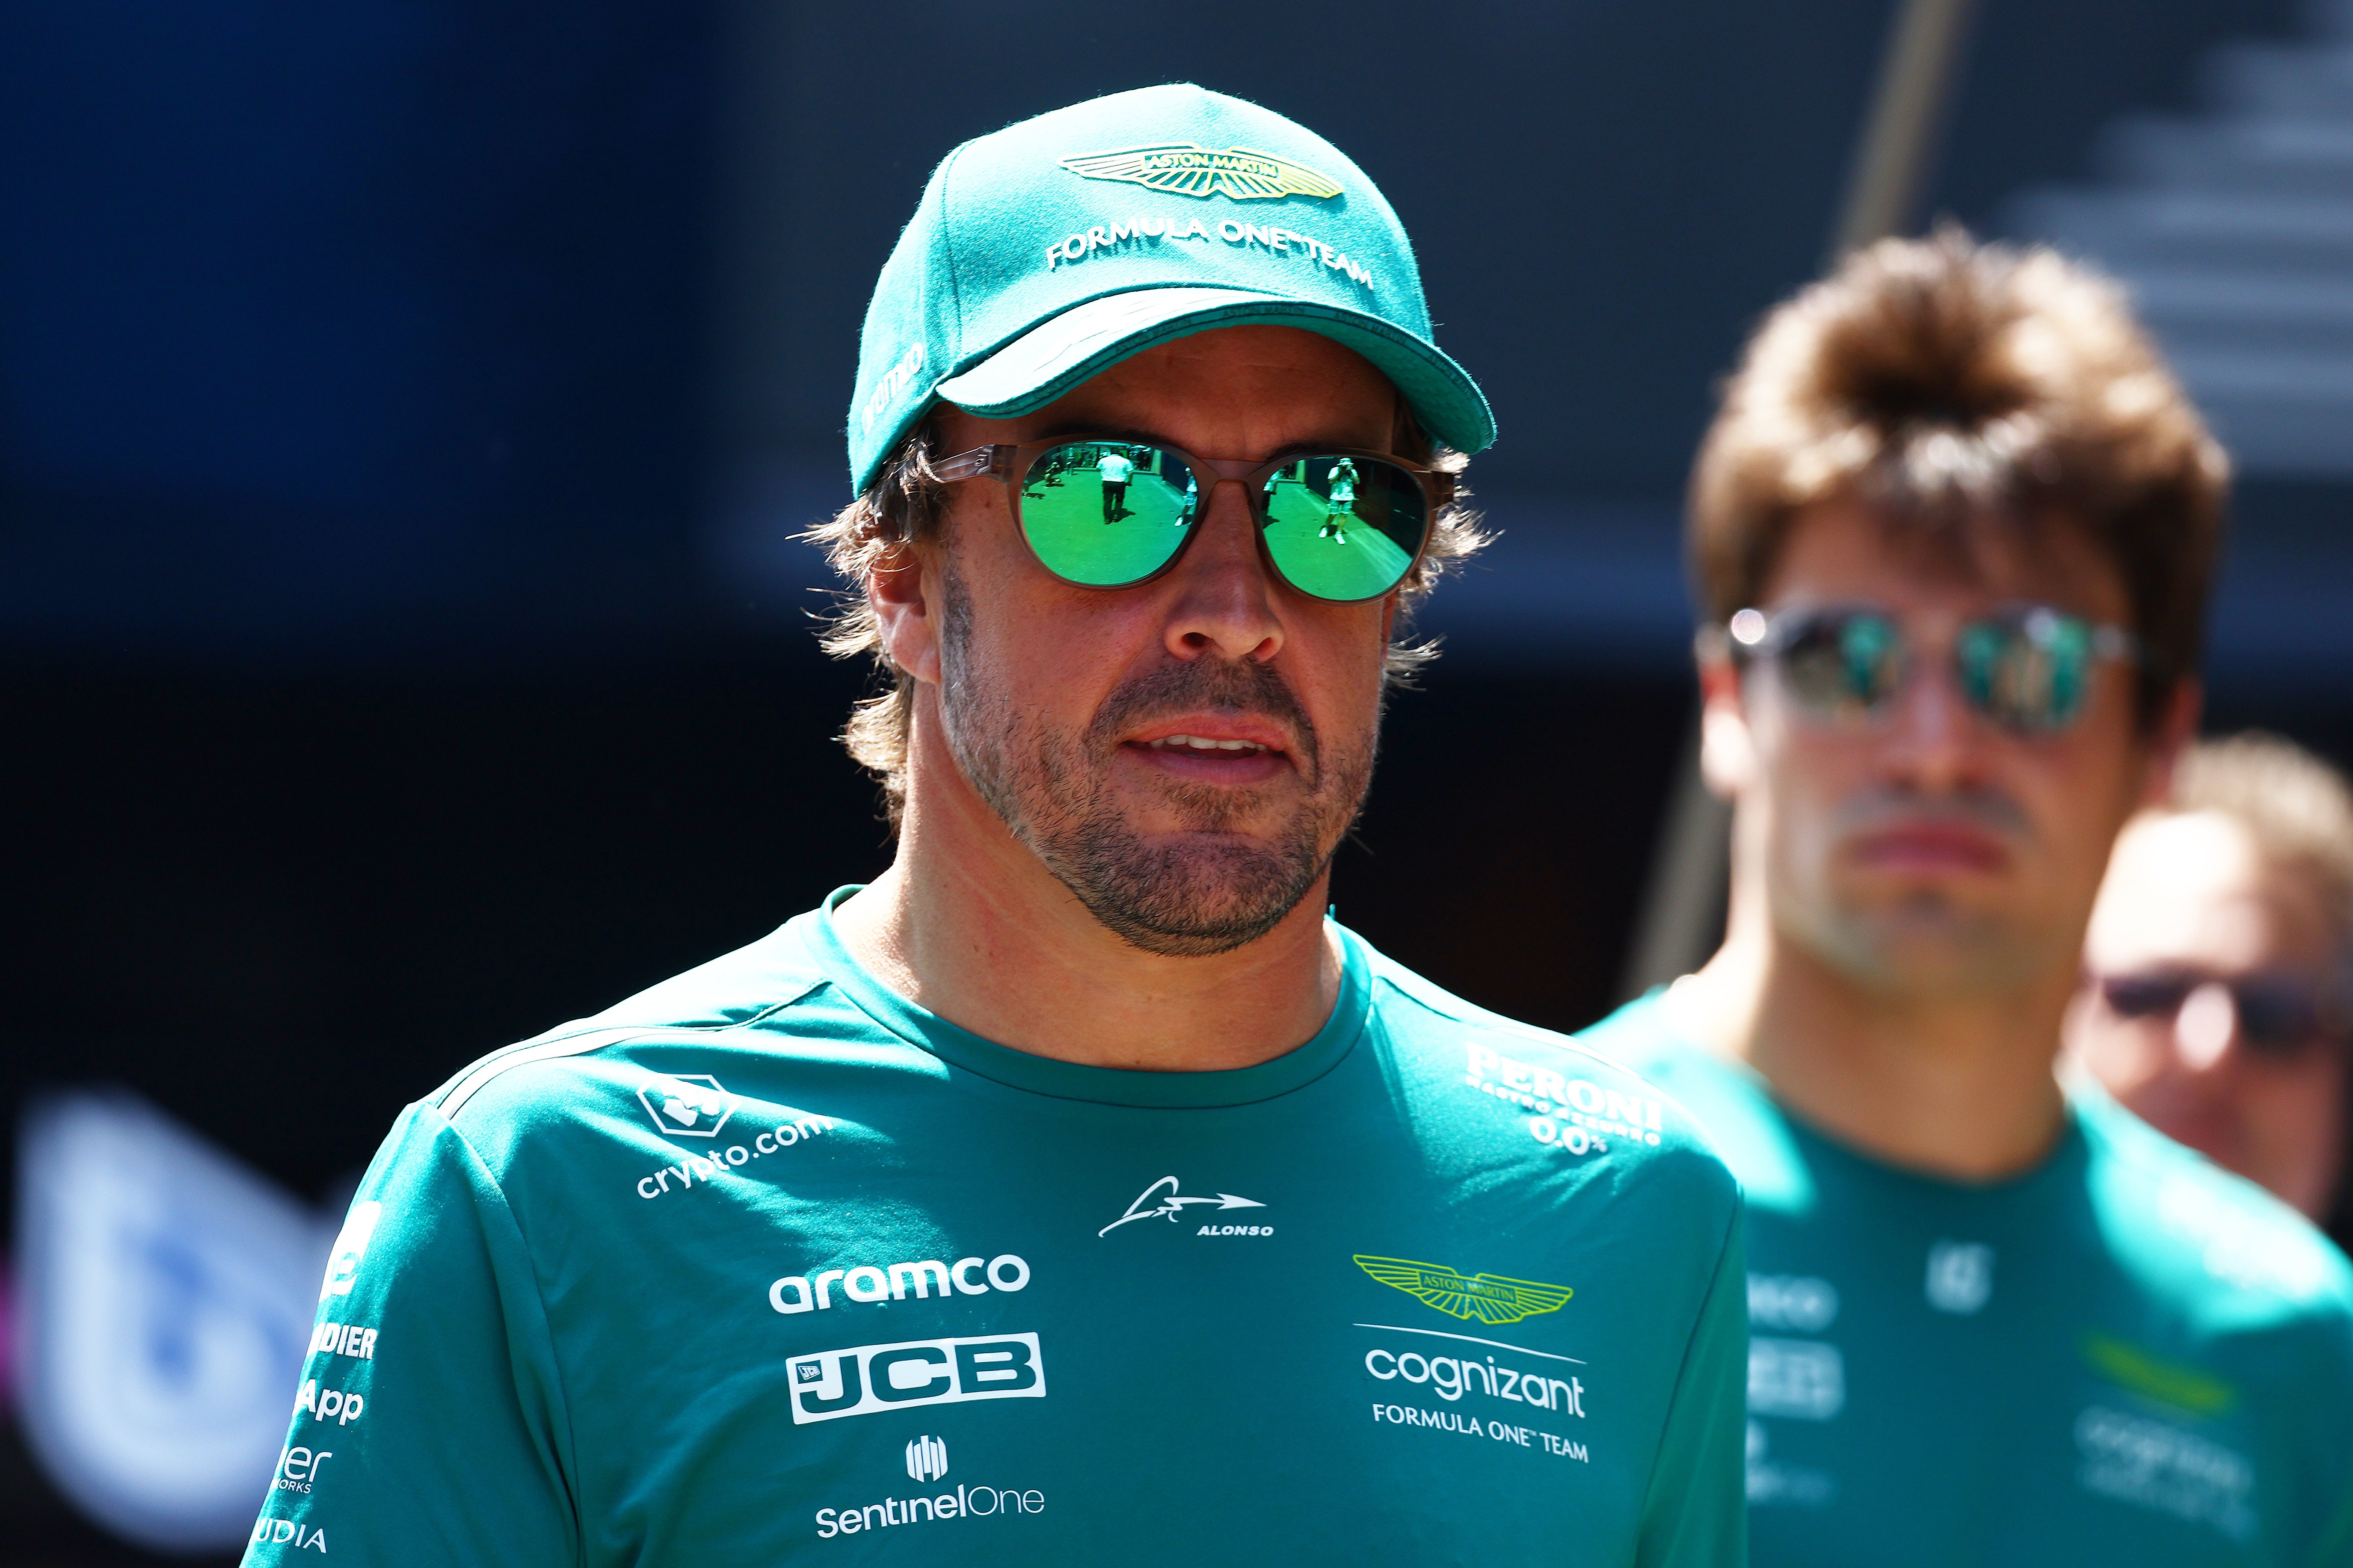 Fernando Alonso could be approached as a short-term option for Mercedes